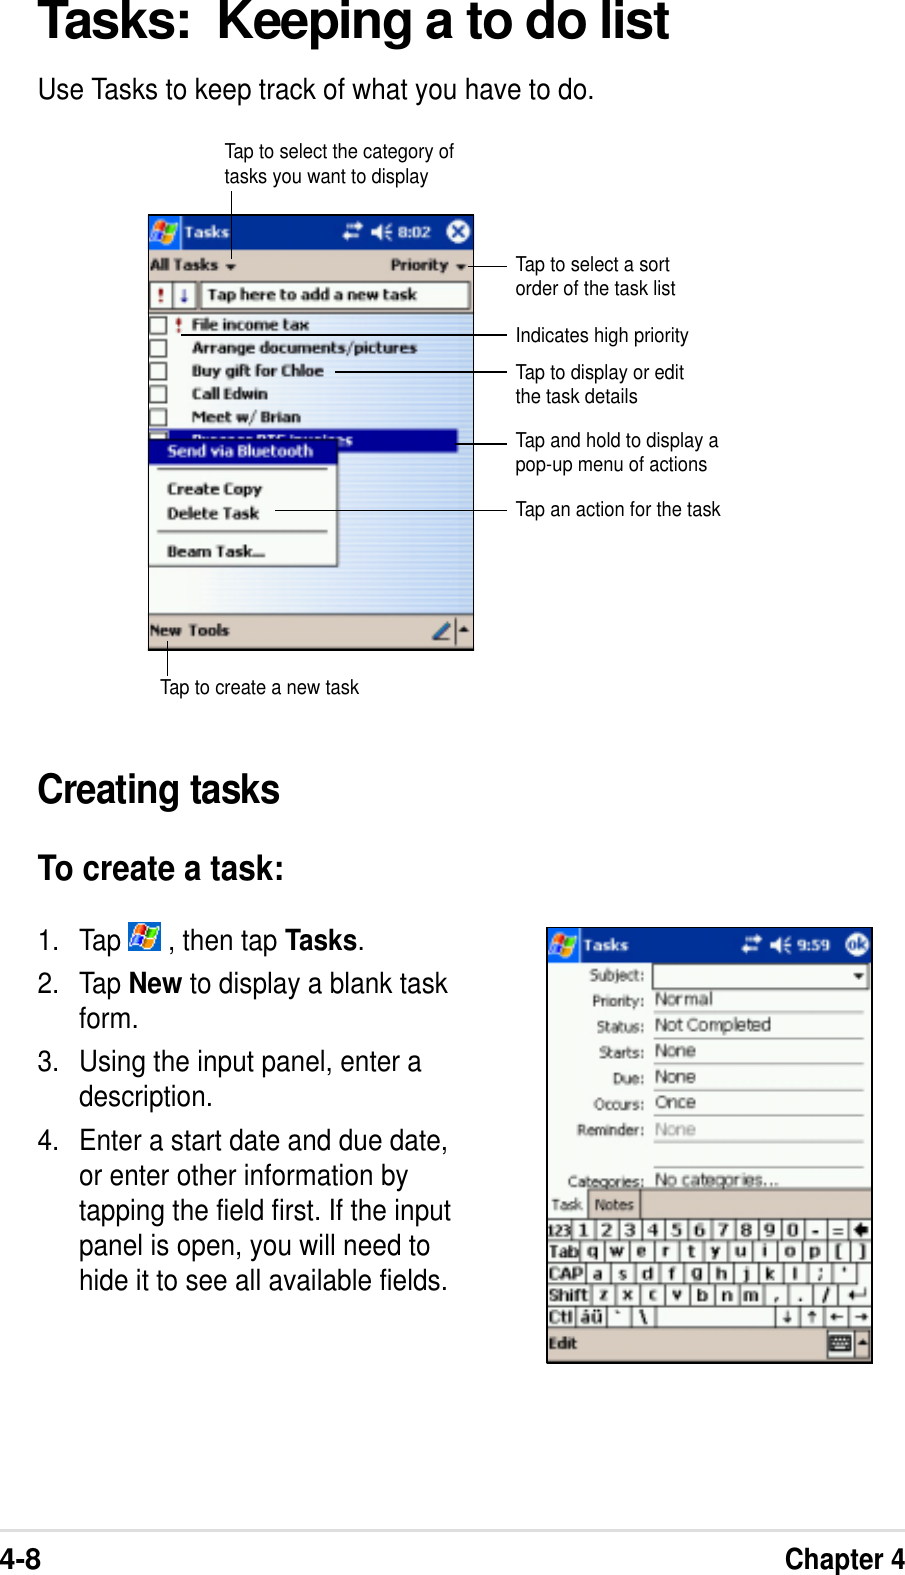 4-8Chapter 4Tasks:  Keeping a to do listUse Tasks to keep track of what you have to do.Creating tasksTo create a task:1. Tap   , then tap Tasks.2. Tap New to display a blank taskform.3. Using the input panel, enter adescription.4. Enter a start date and due date,or enter other information bytapping the field first. If the inputpanel is open, you will need tohide it to see all available fields.Tap to select a sortorder of the task listTap to select the category oftasks you want to displayIndicates high priorityTap to display or editthe task detailsTap and hold to display apop-up menu of actionsTap an action for the taskTap to create a new task